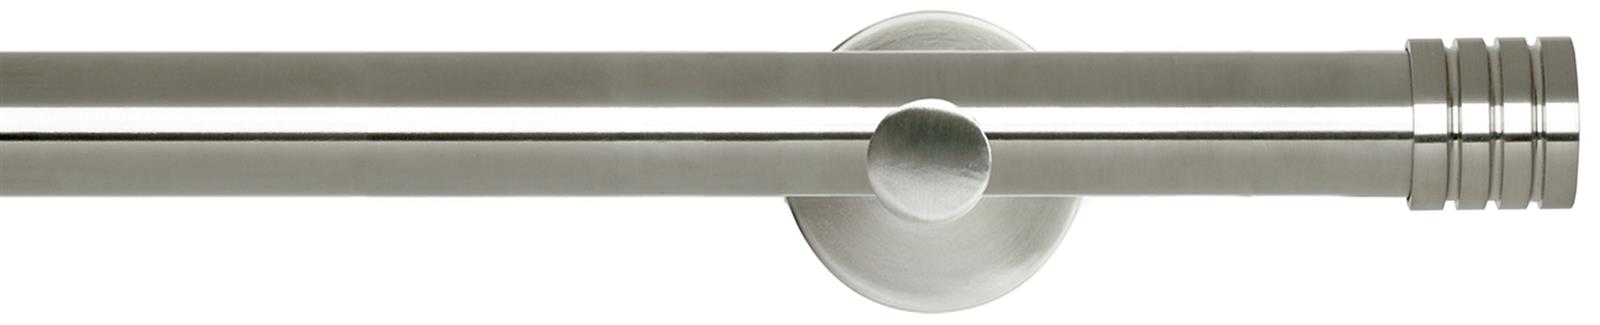 Neo 28mm Eyelet Pole Stainless Steel Cylinder Stud